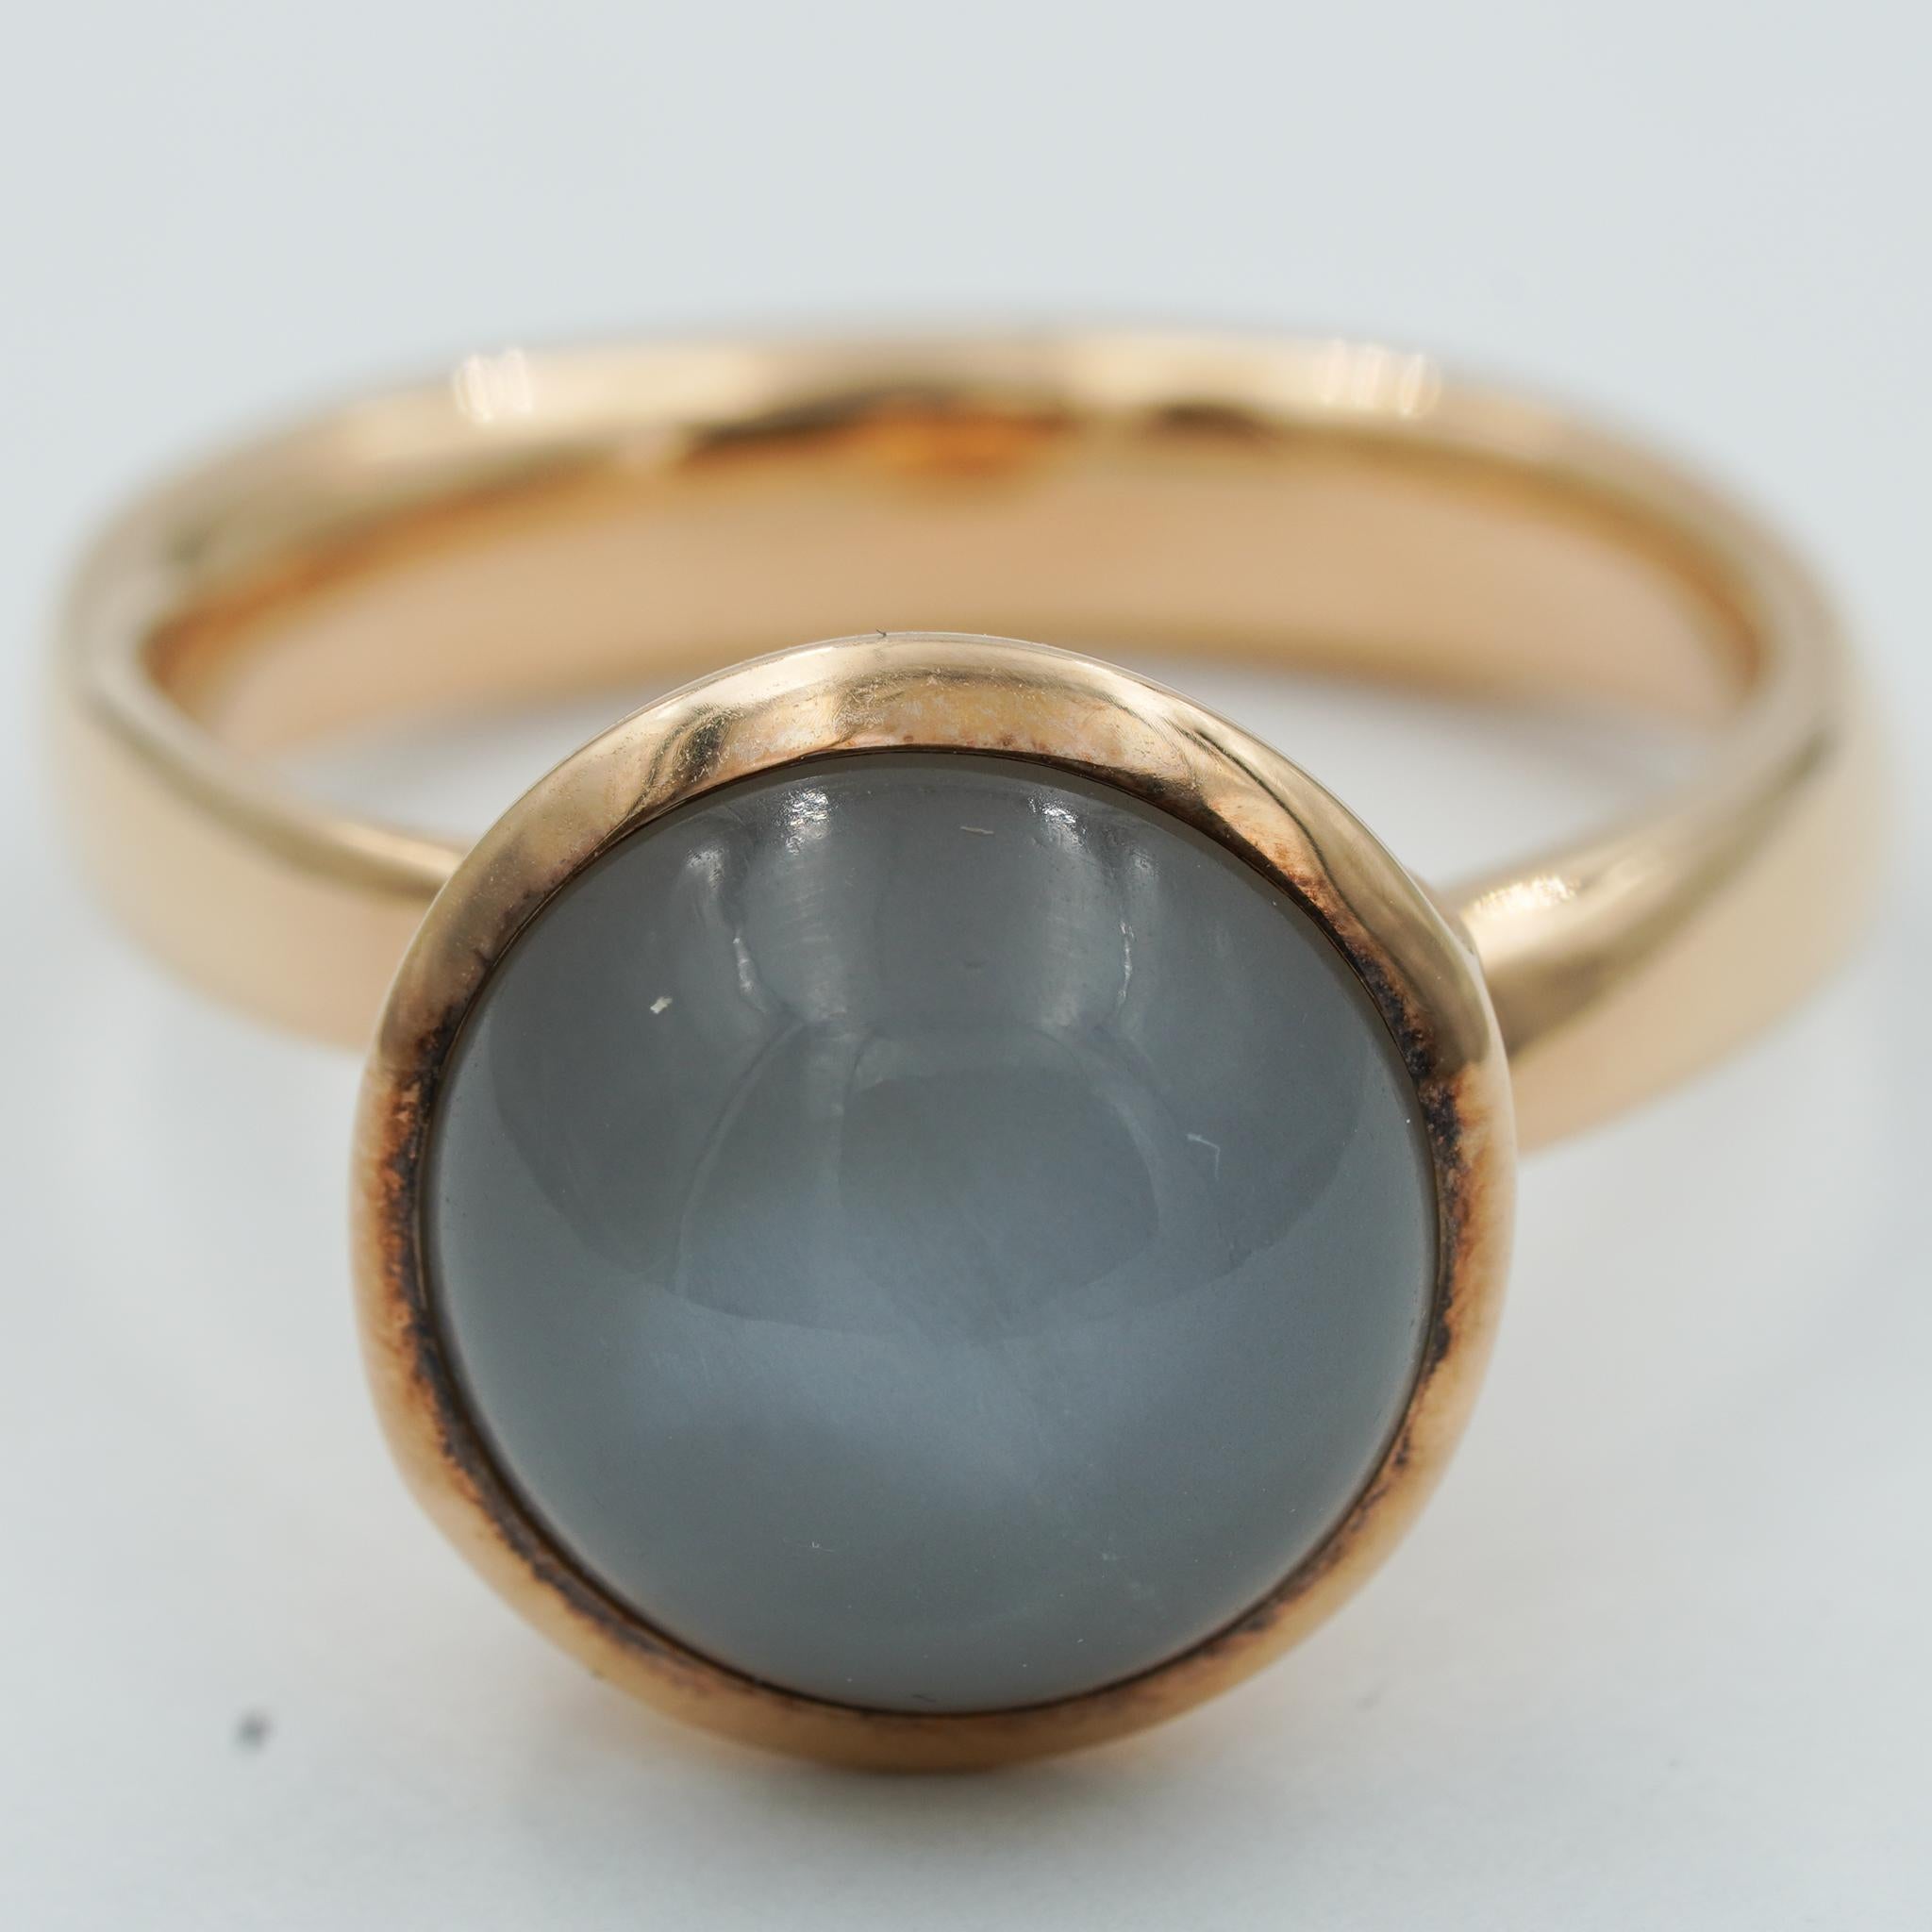 This Tamara Comolli large, stackable bouton ring features a beautiful cabochon-cut Moonstone, and is also available with a wide variety of other gems and in all shades of gold. Pair large bouton rings with the small or Solitaire editions and stack